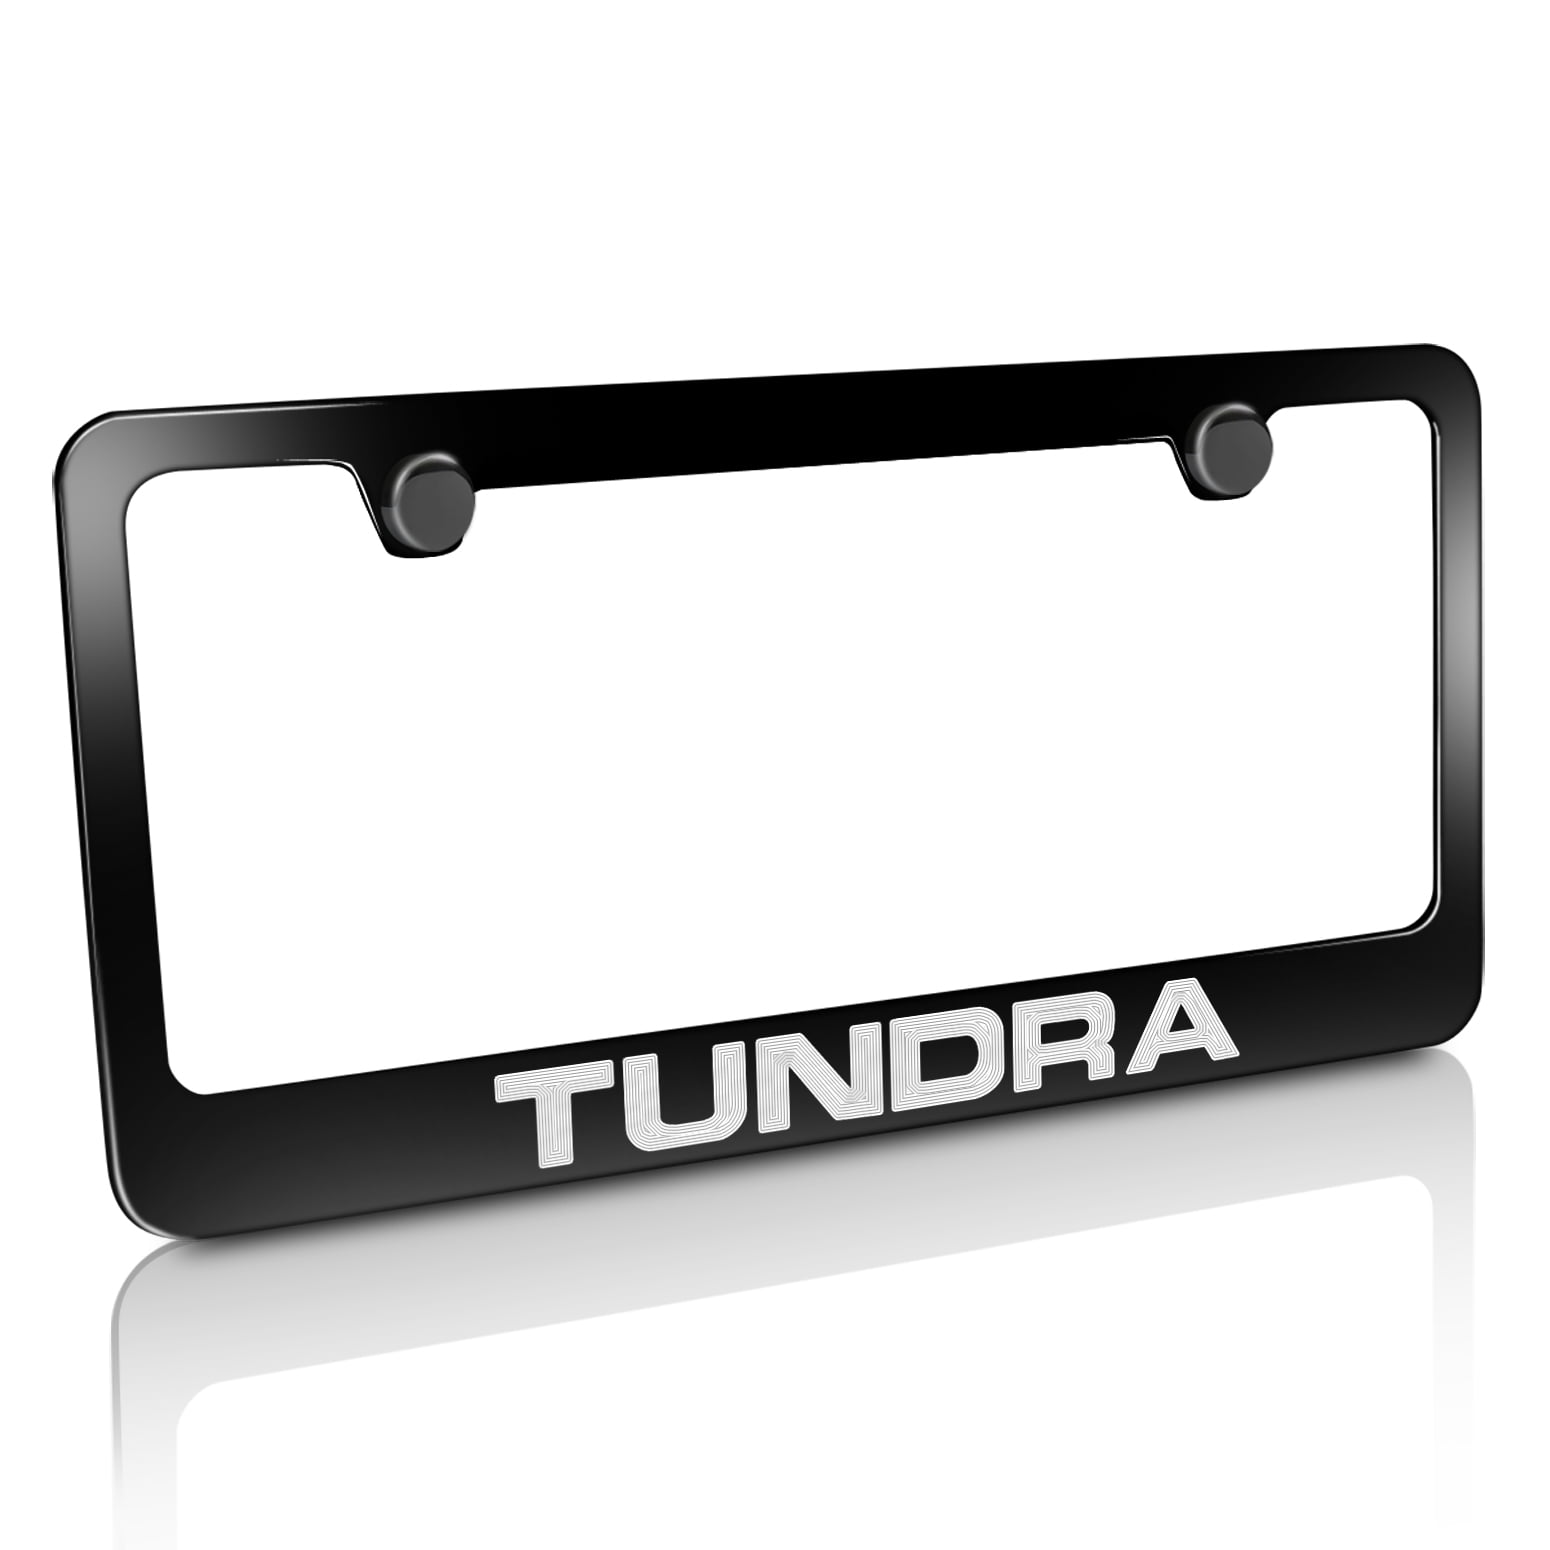 Brand New Replacement Toyota Tundra License Plate Frame In Black 